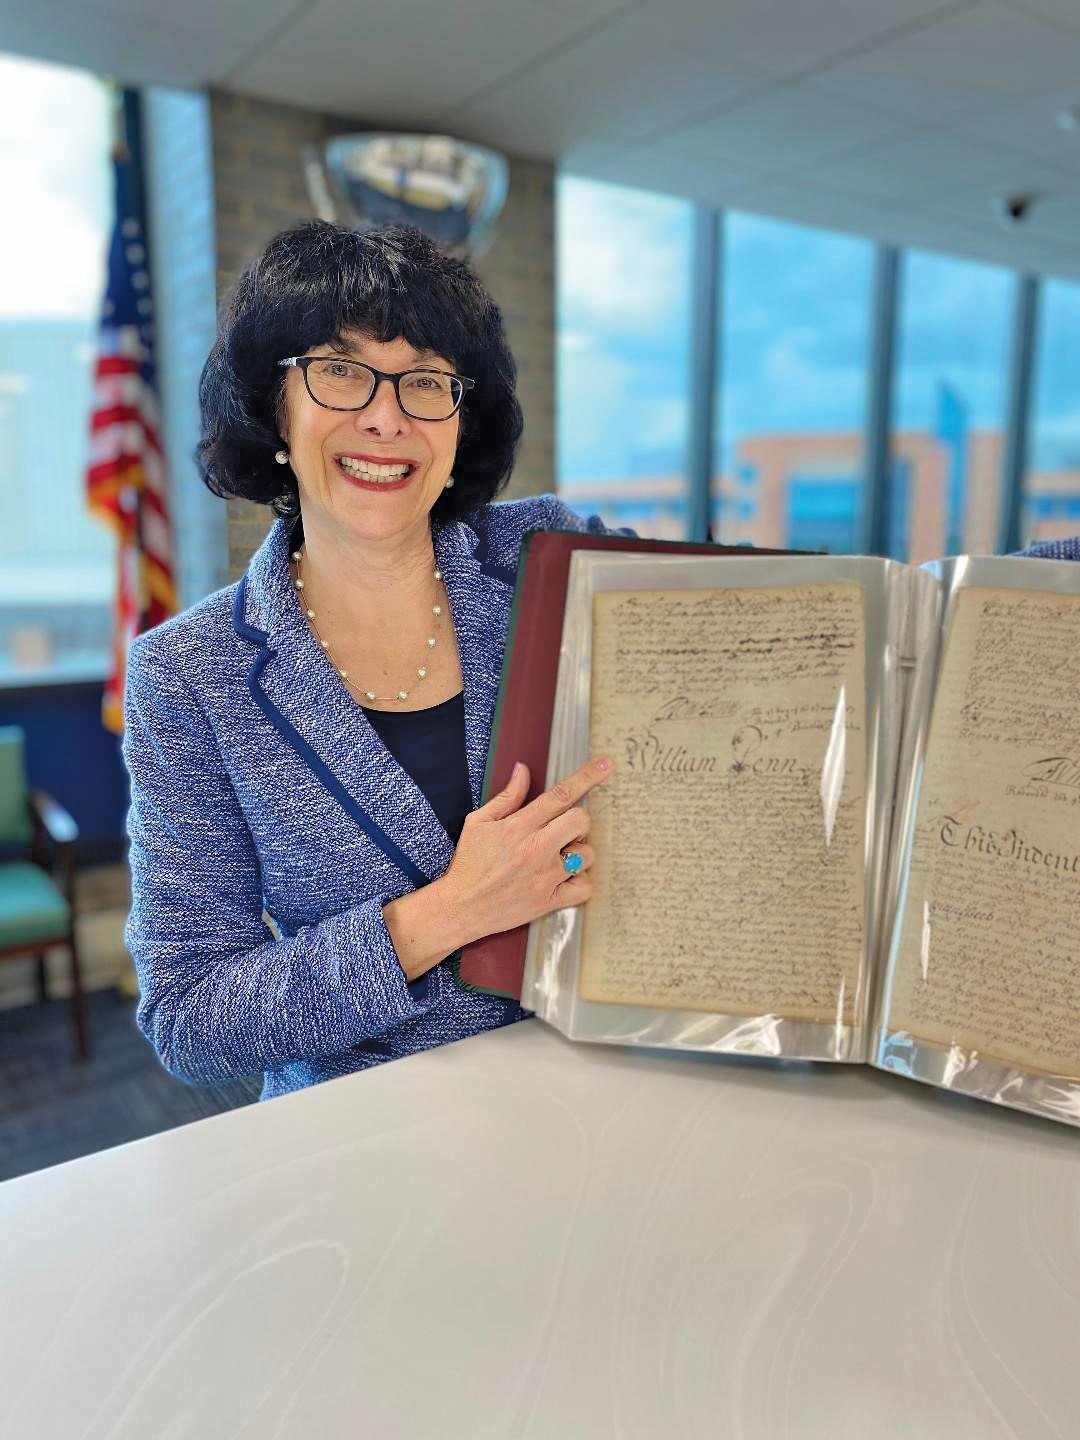 Bucks County Recorder of Deeds Robin Robinson with one of the books containing records she has had preserved using grant money. She has also expanded online access to deeds dating to 1684.